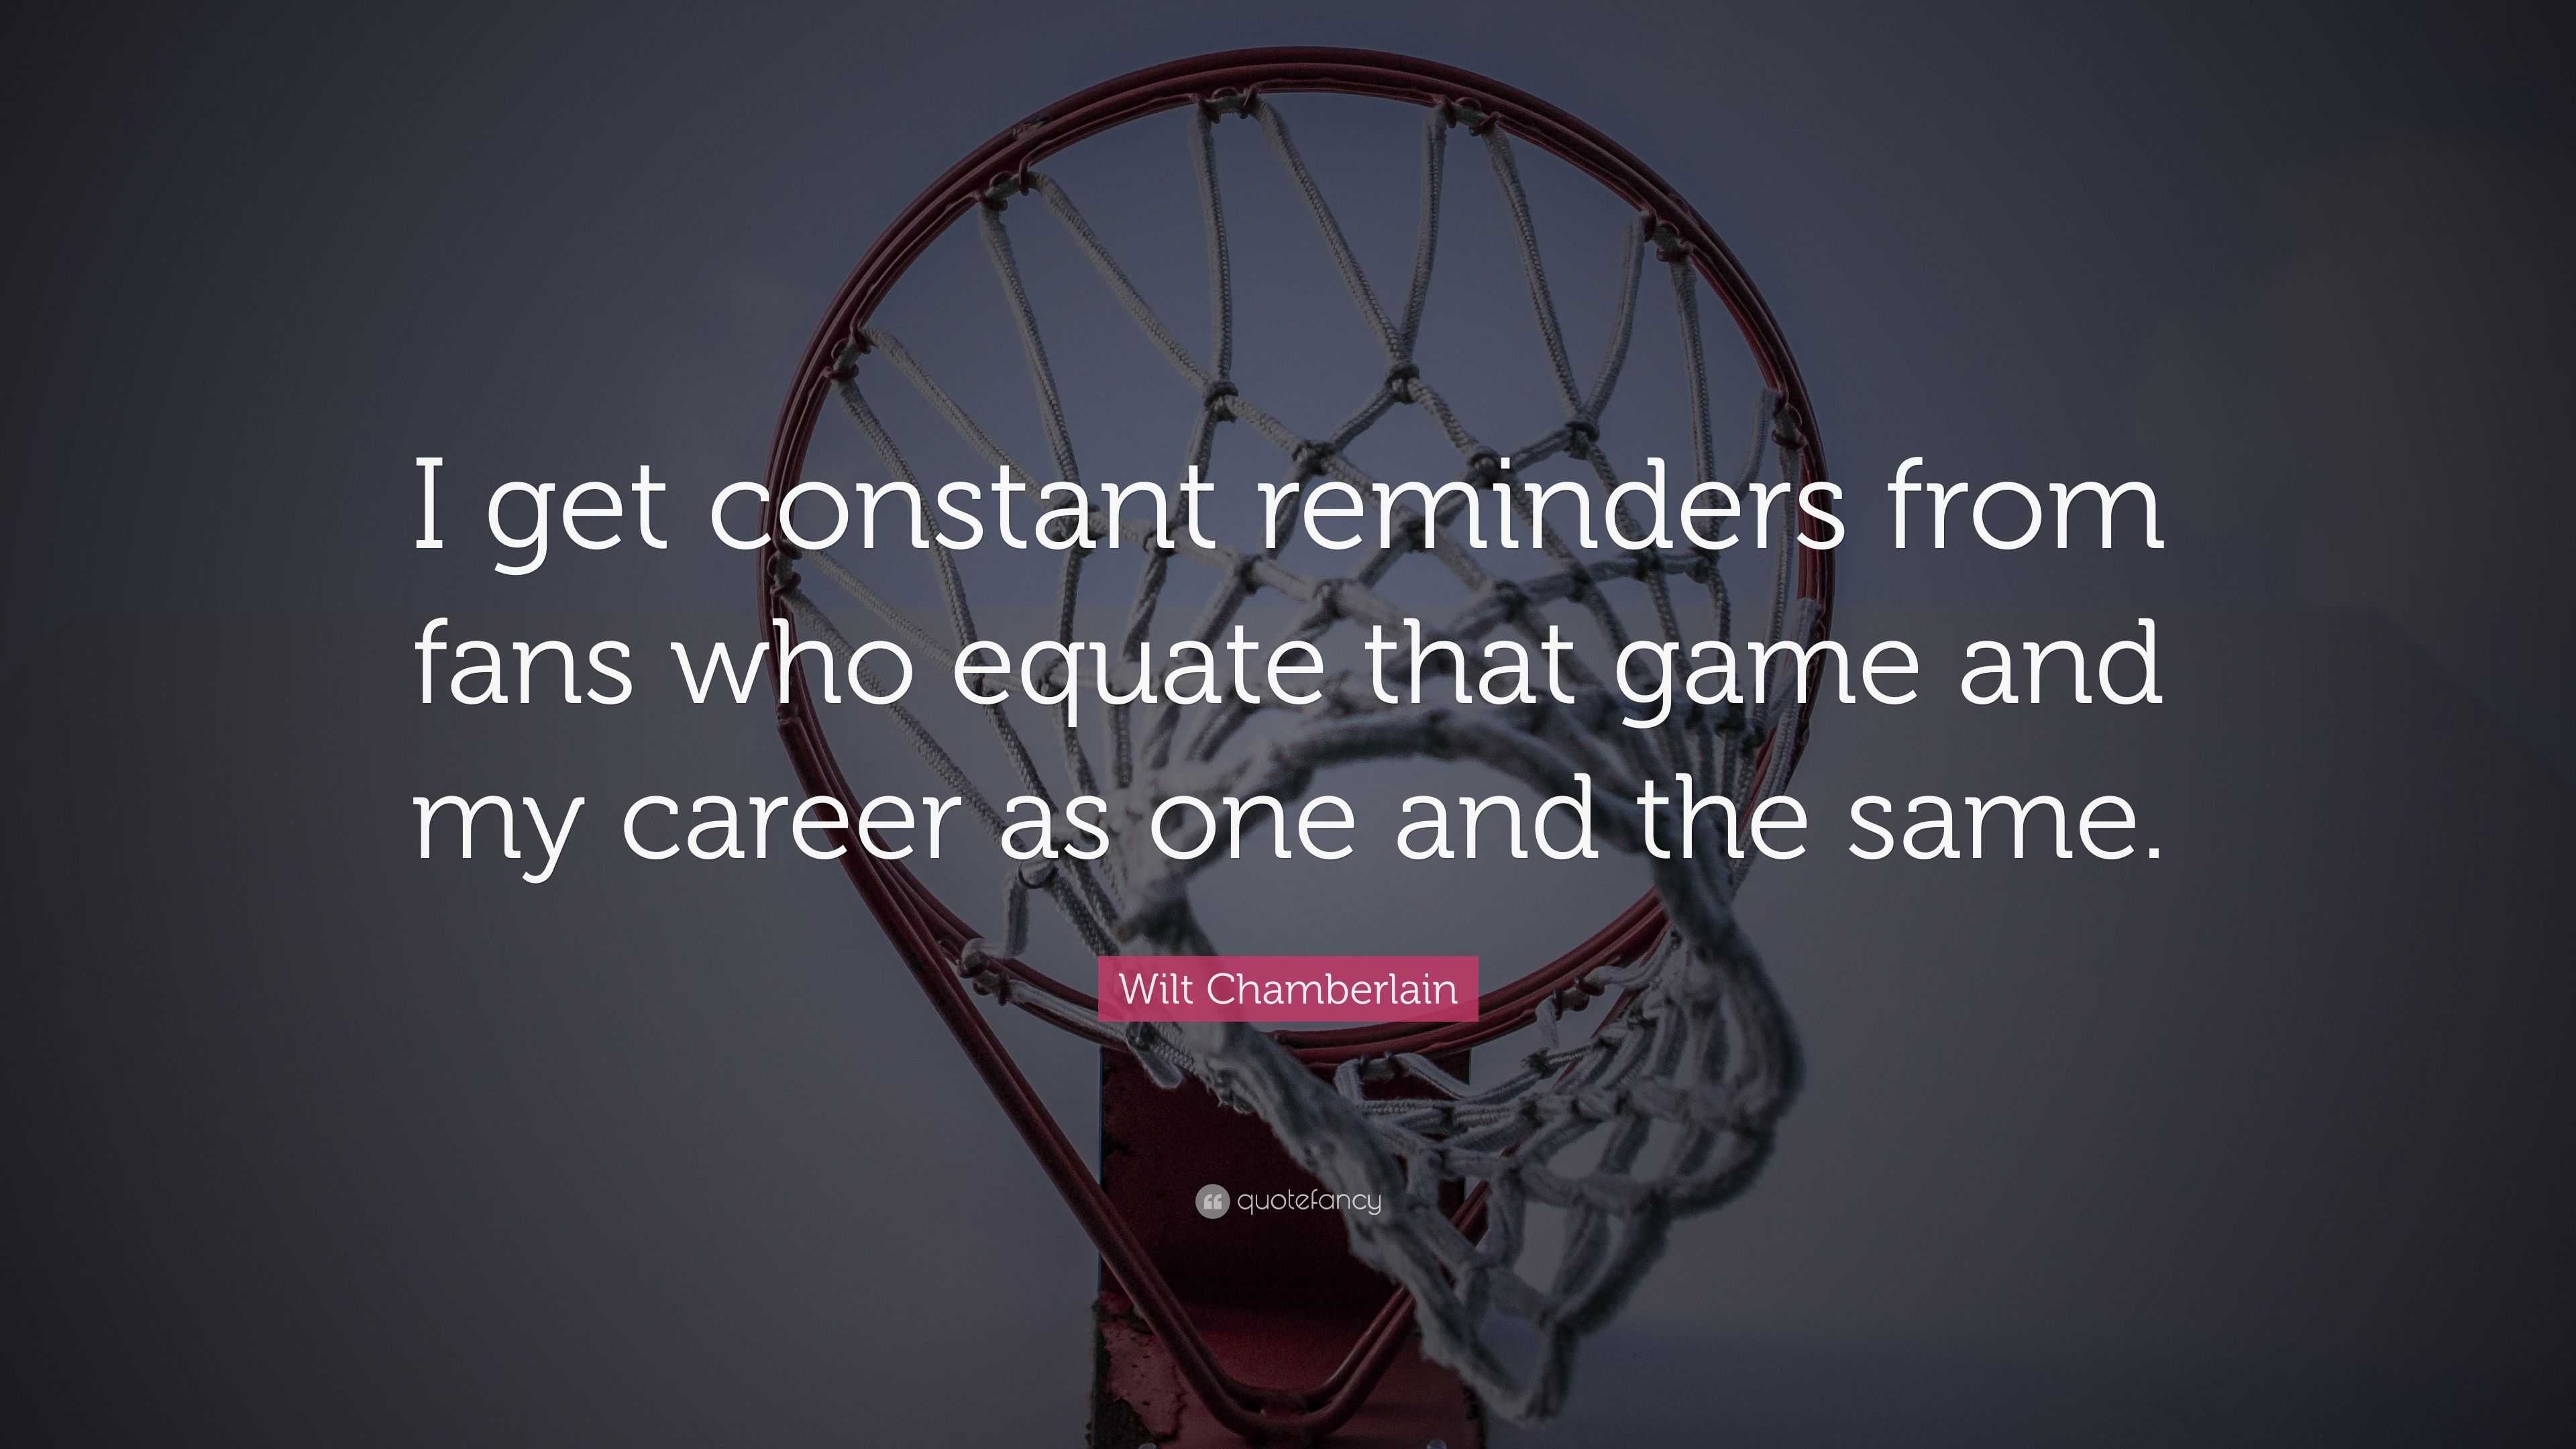 Wilt Chamberlain Quote: “I get constant reminders from fans who equate ...